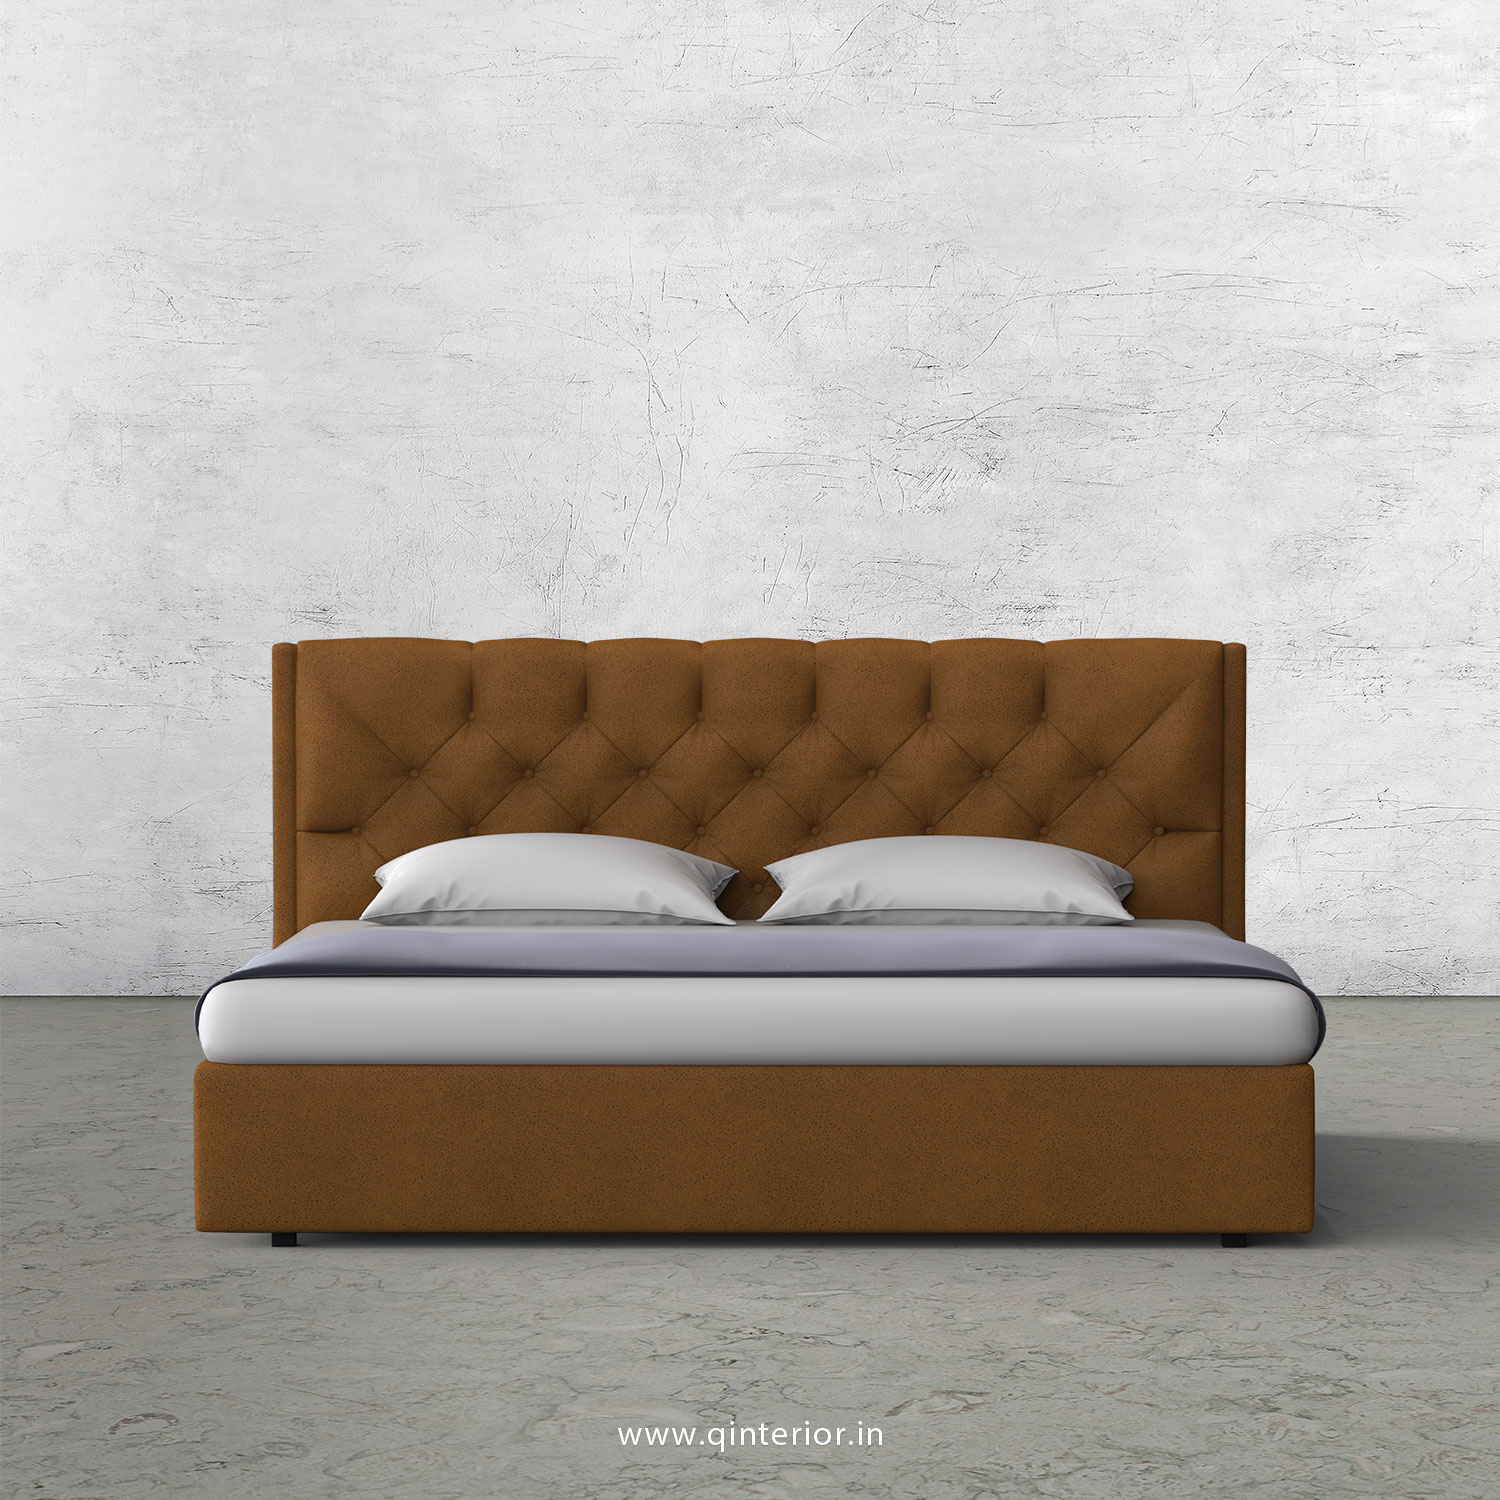 Scorpius King Size Bed in Fab Leather Fabric - KBD009 FL14